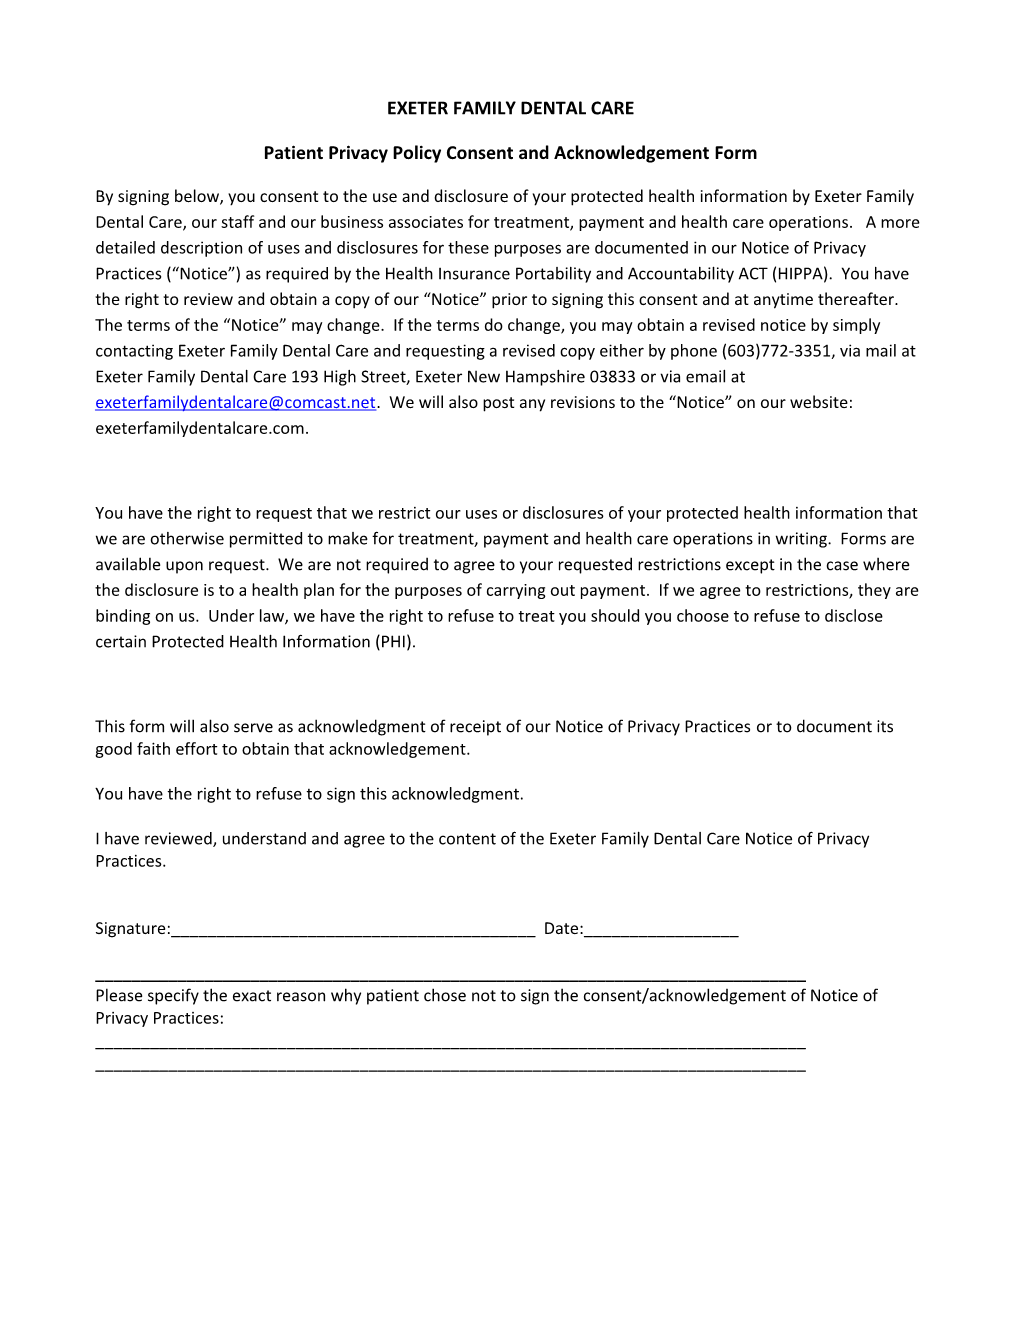 Patient Privacy Policy Consent and Acknowledgement Form